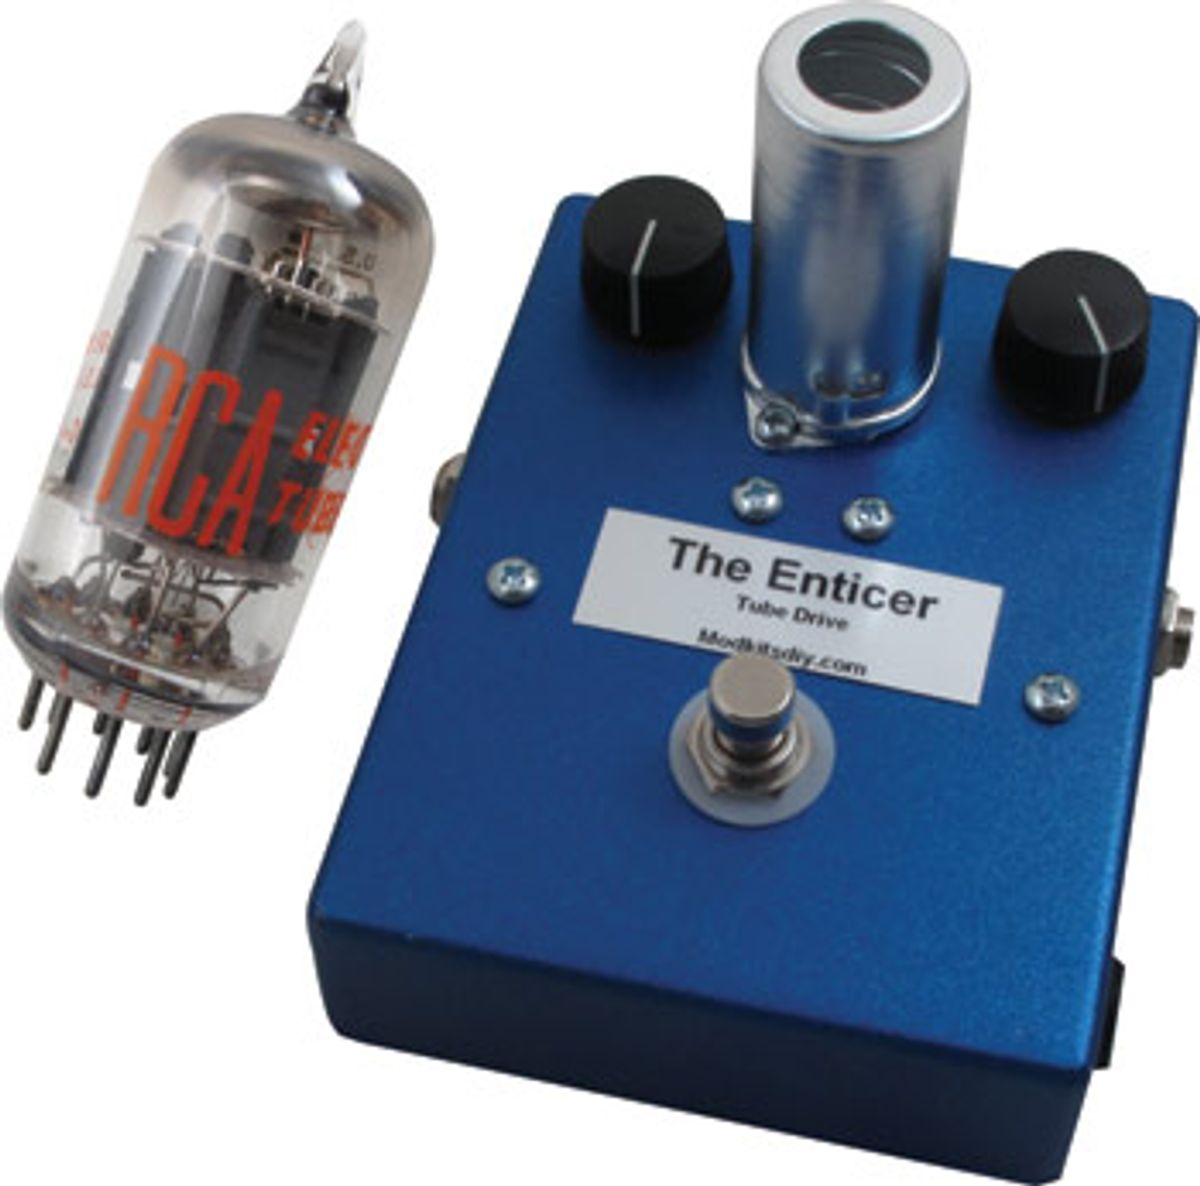 Mod Kits Releases The Enticer